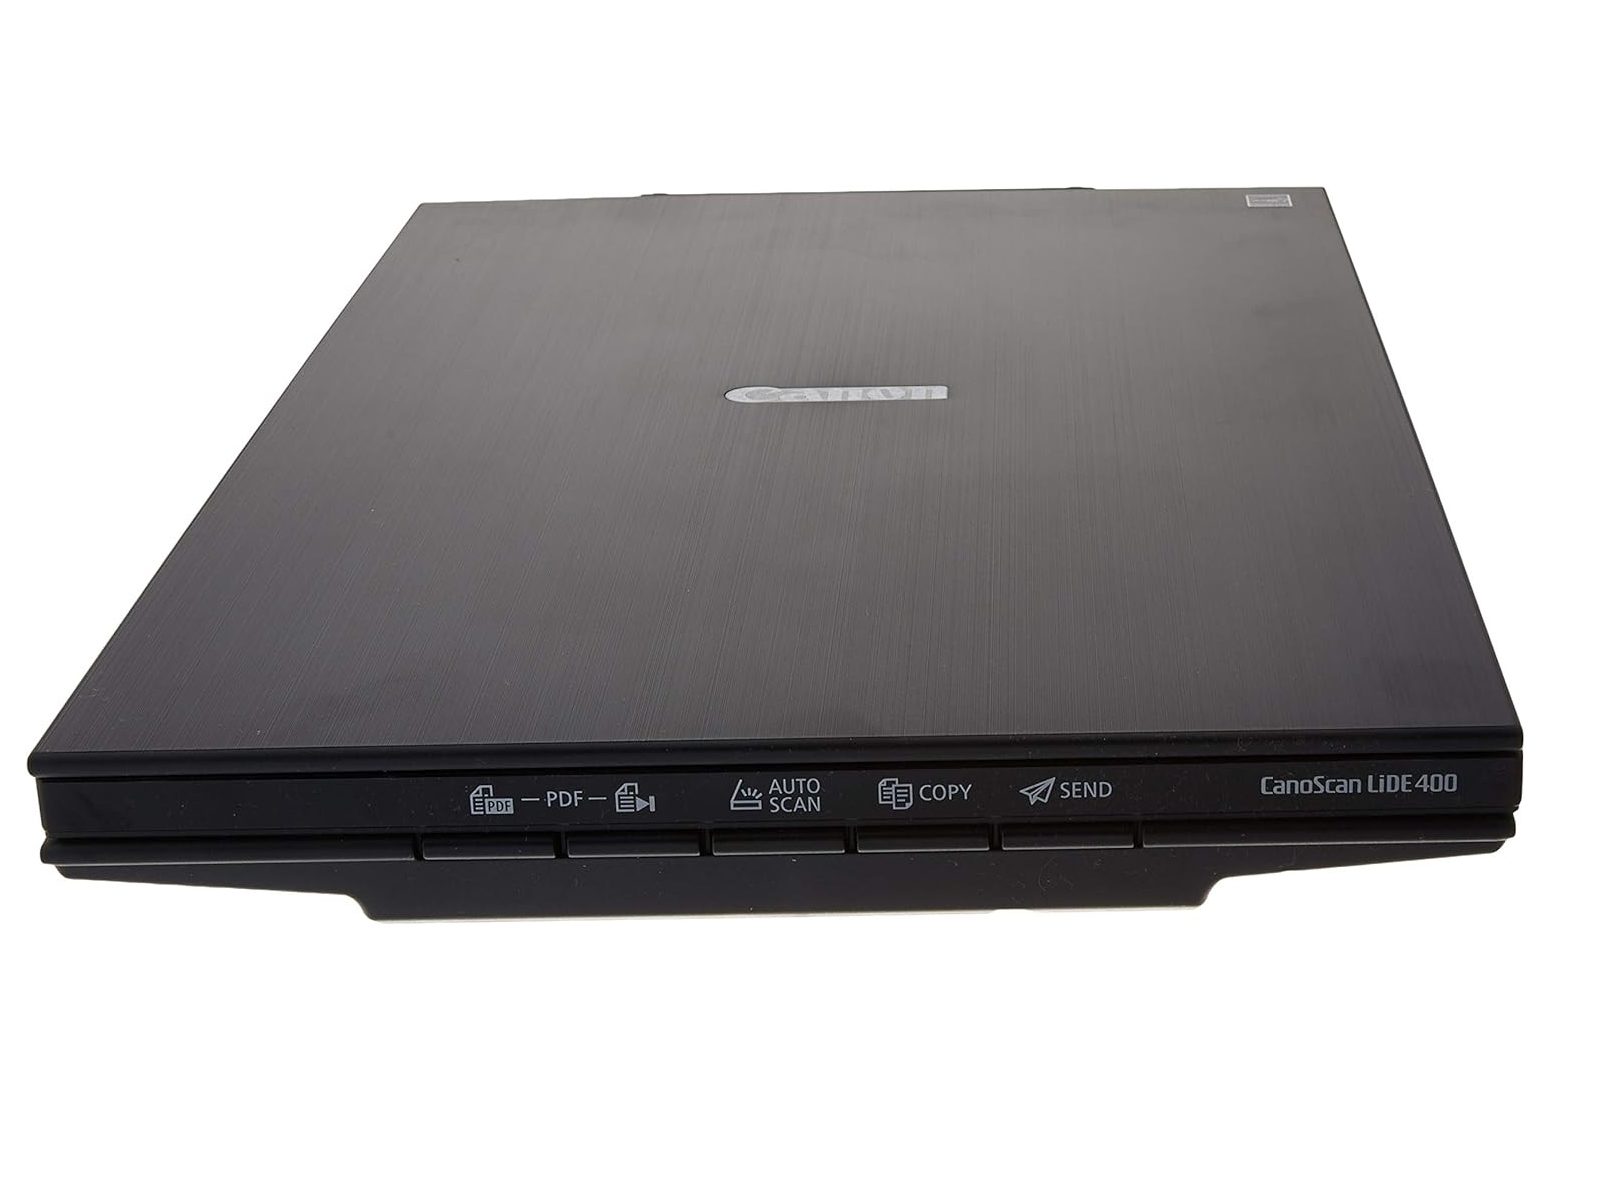 A side view of the Canon CanoScan Lide 400 photo scanner.